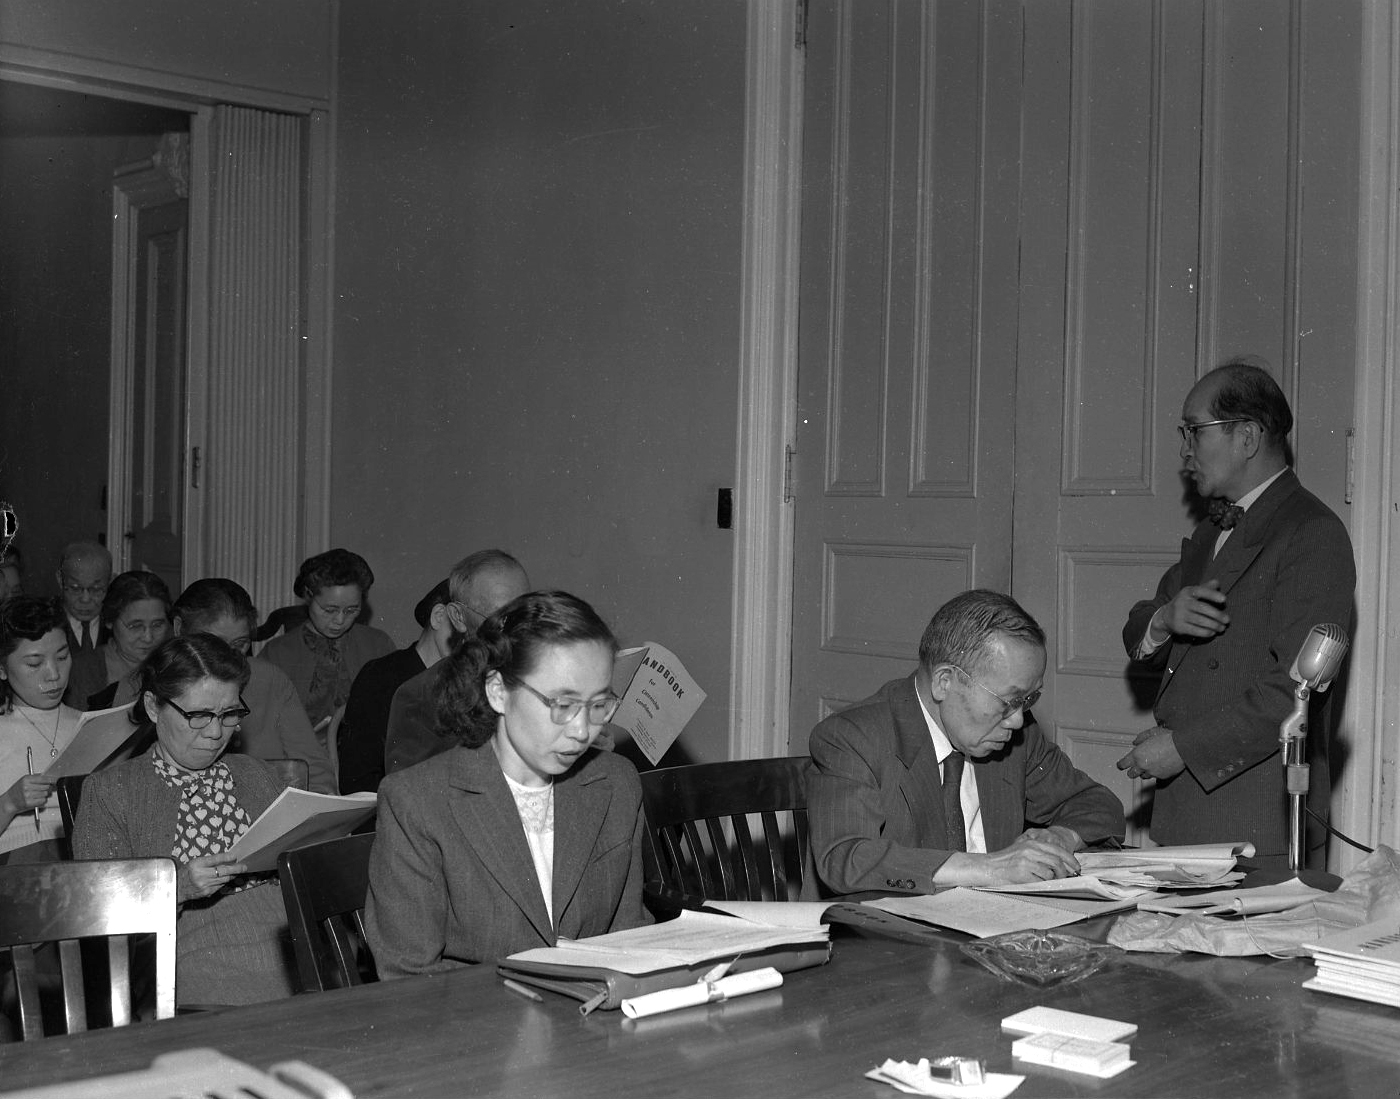 Classes like this one helped meet the CRC’s goal for resettlers to join the wider society. The first executive director, Corky Kawasaki stands at right. Kawasaki the CRC in 1947 to join the Quaker organization in Philadelphia. From the Japanese American Service Committee Records, RG 10